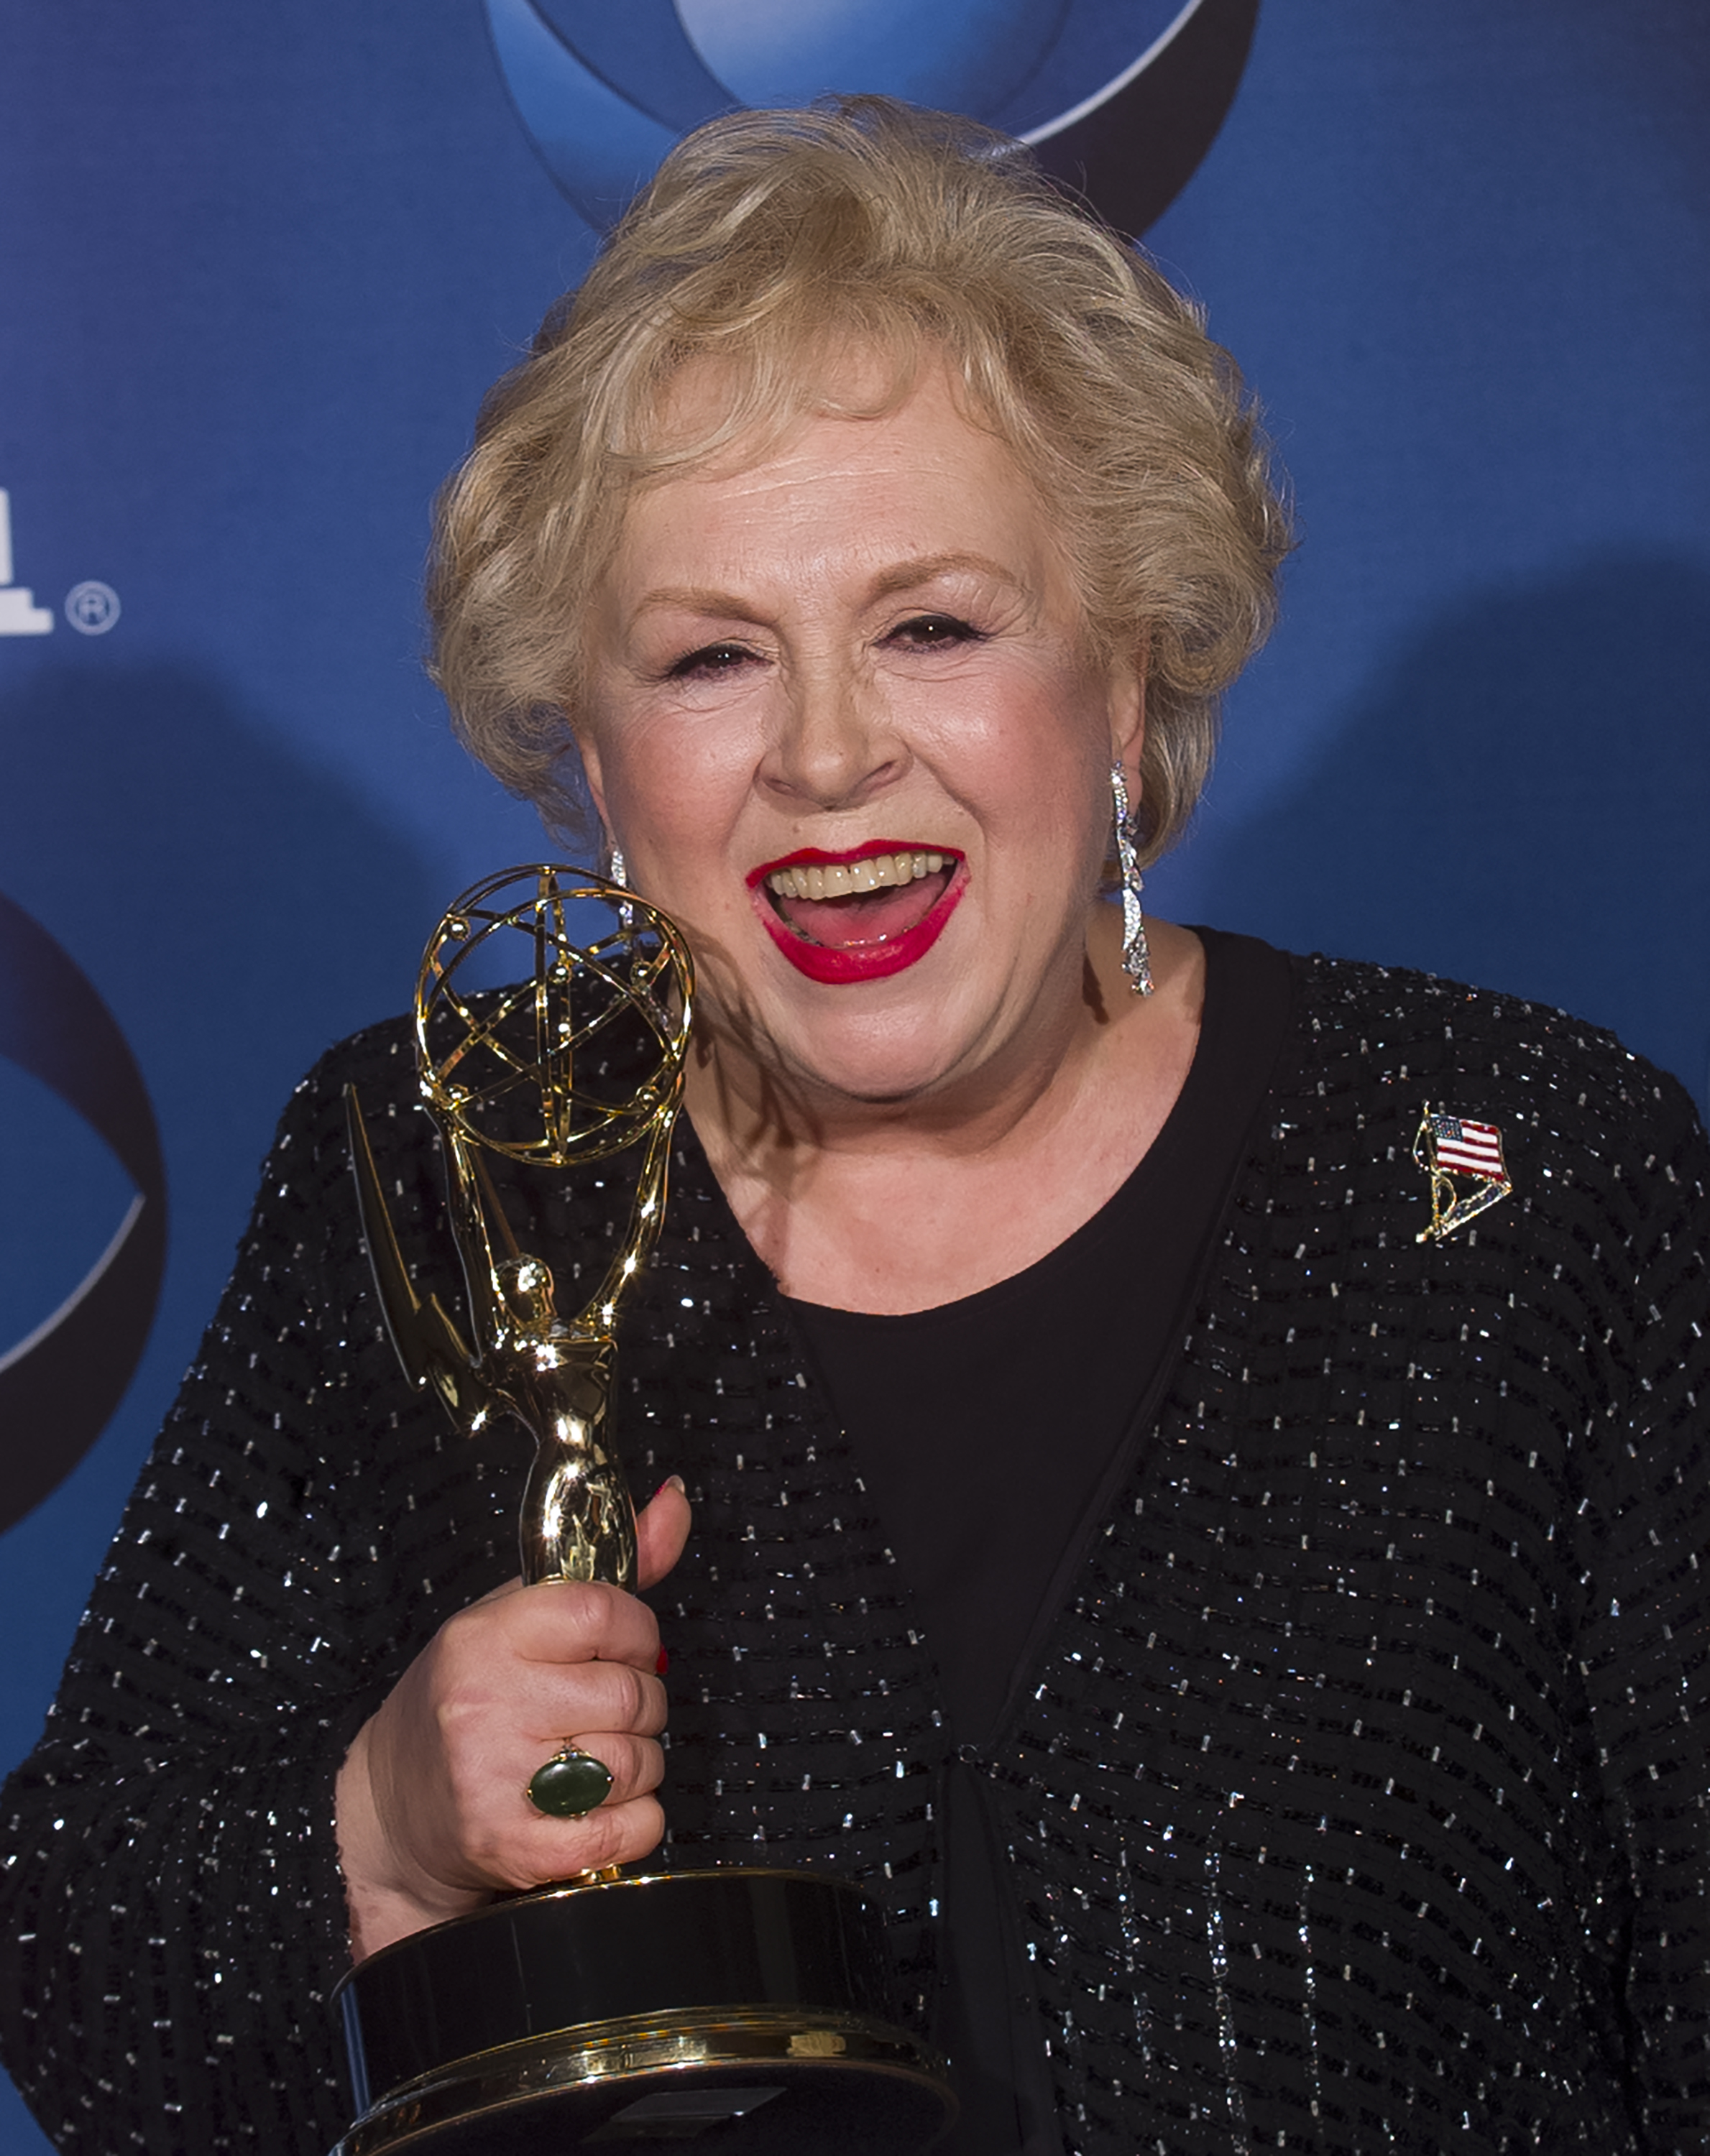 Doris Roberts backstage at the 53rd Emmy Awards show on November 4, 2001, in Los Angeles, California | Source: Getty Images